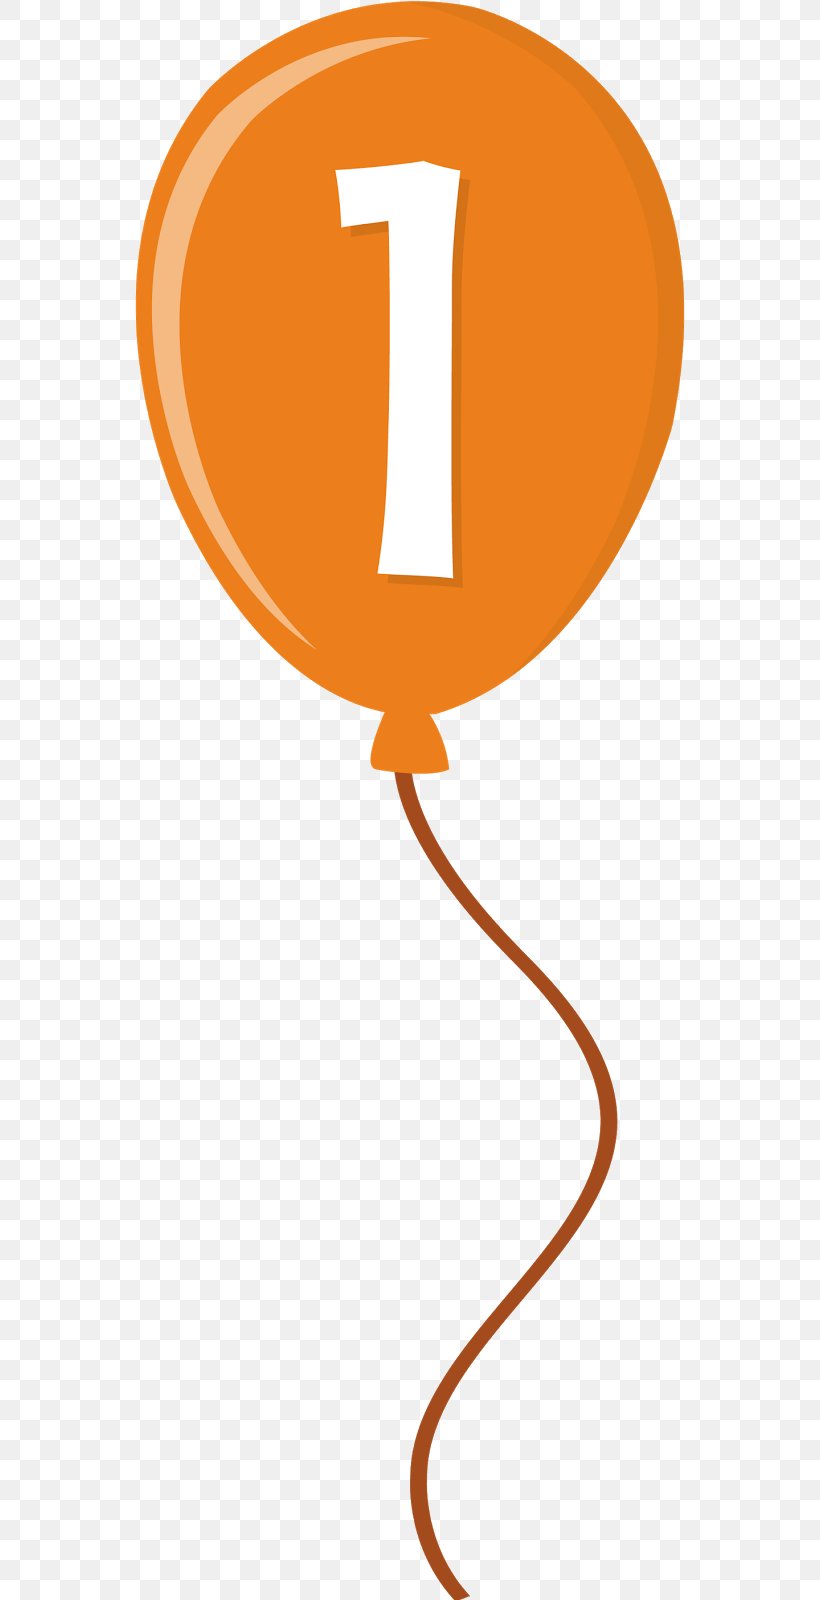 Balloon Clip Art, PNG, 638x1600px, Balloon, Greeting Note Cards, Orange, Party, Royaltyfree Download Free